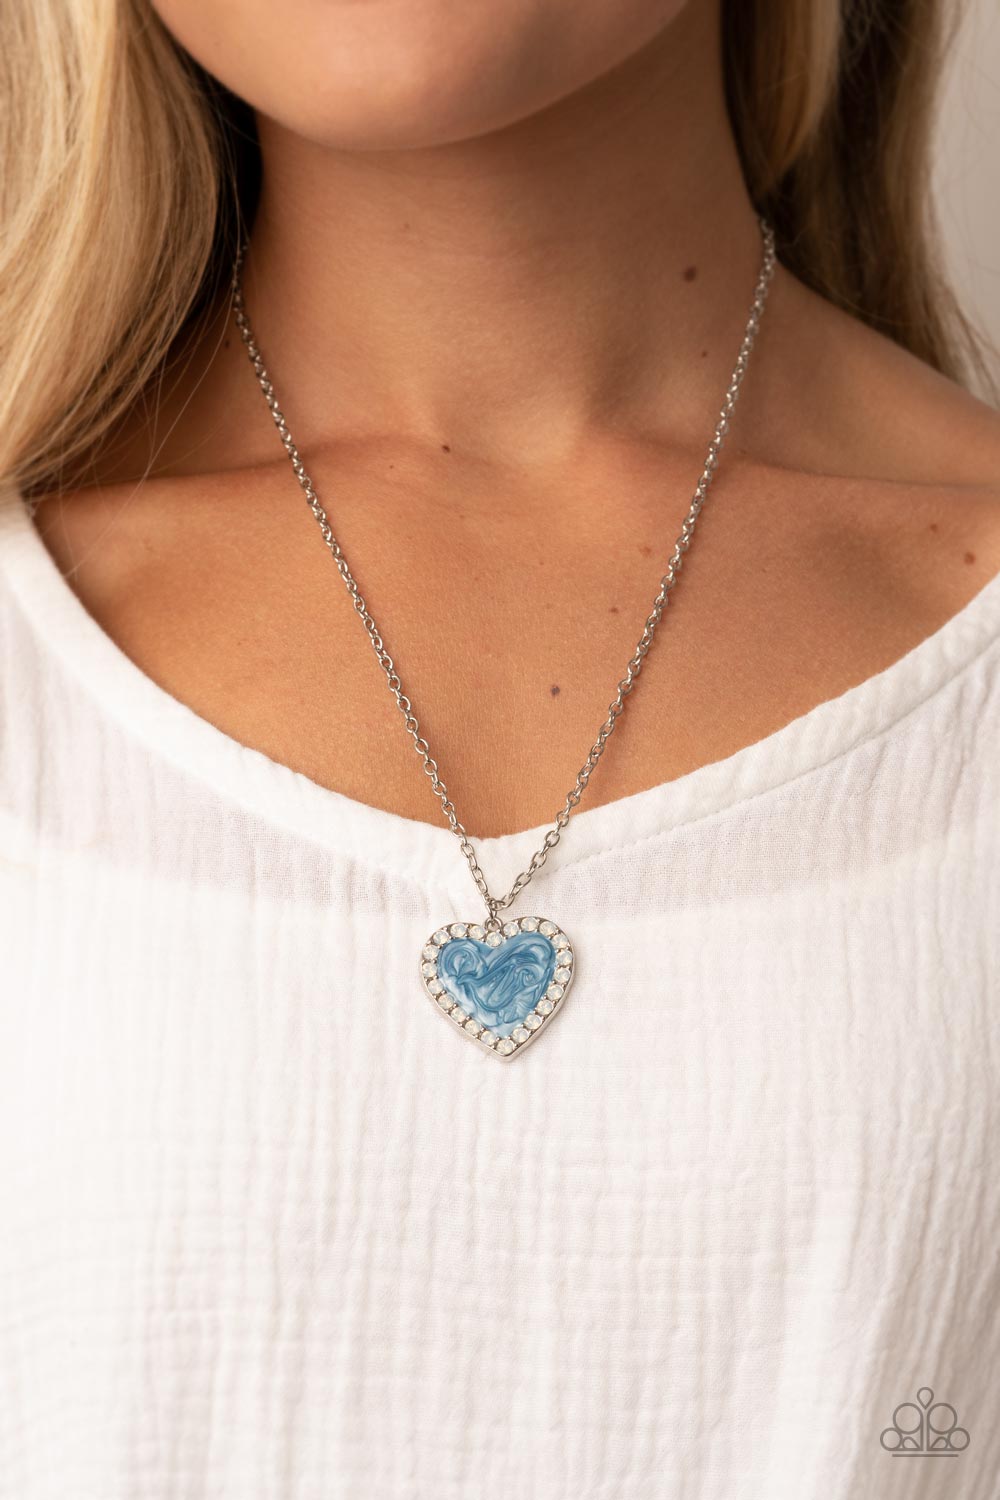 Paparazzi Necklaces - Heart Full of Luster - Blue